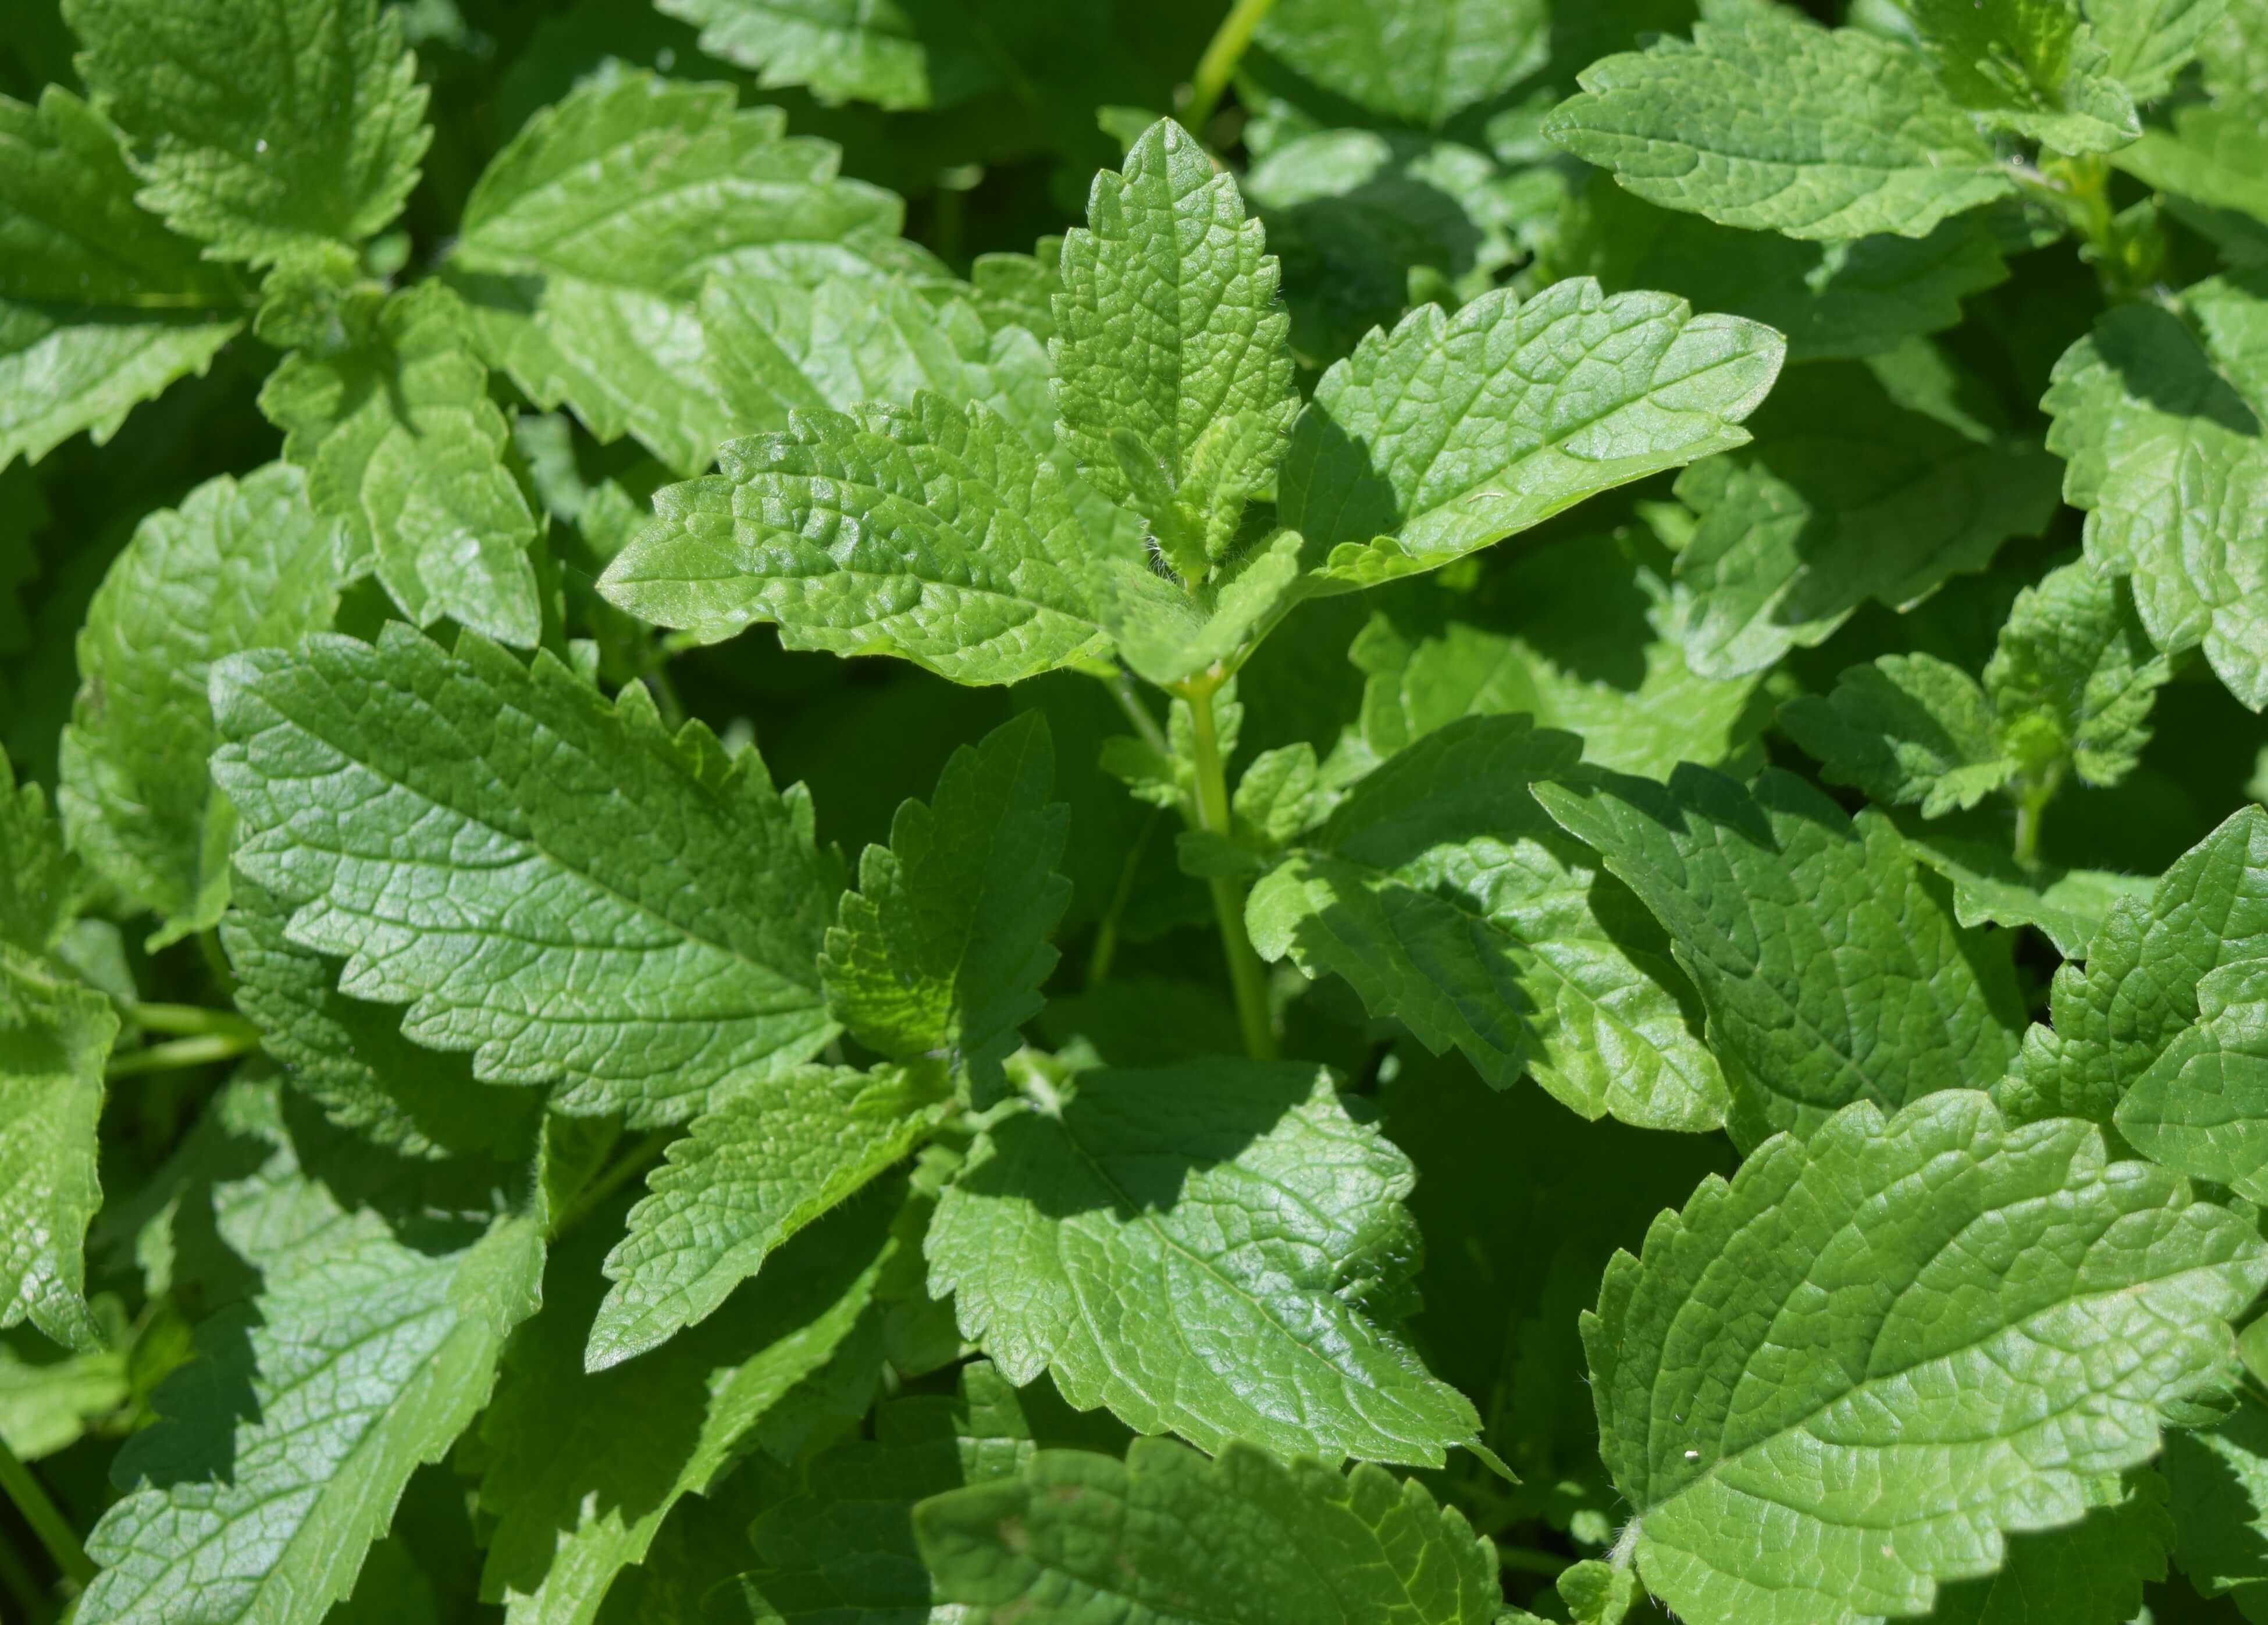 Also known as lemon balm, Melissa is a lemon flavored herb which has historically been associated with the honey bee. In fact, the ancient Greek word from which it derives translates as 'honeybee'. In the classic Greek mythology, Amalthea's sister Melissa fed honey to the infant Zeus. As its historical roots imply, it is a favorite plant of the honey bee and whereever it is planted, honey bees will soon arrive.